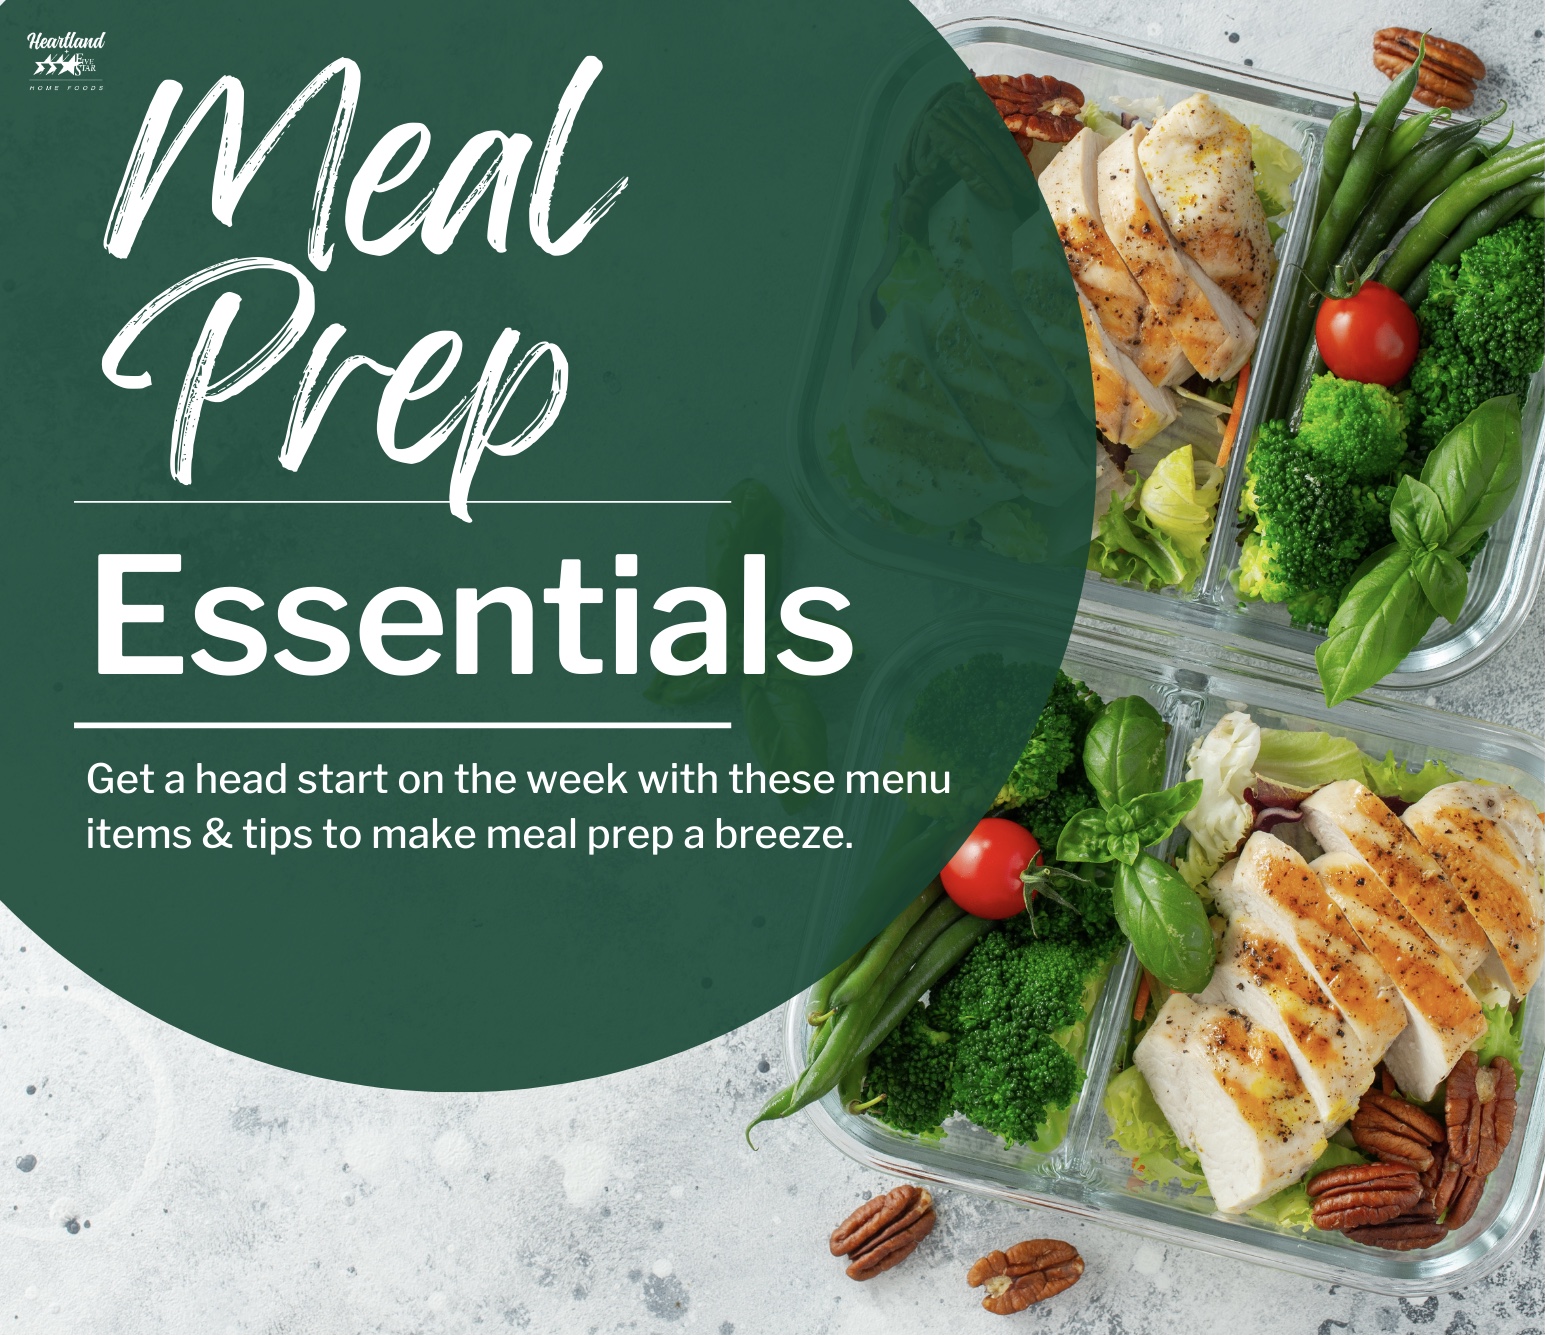 Save Money and Eat Well: Meal Prep Is The Way to Go! – Five Star Home ...